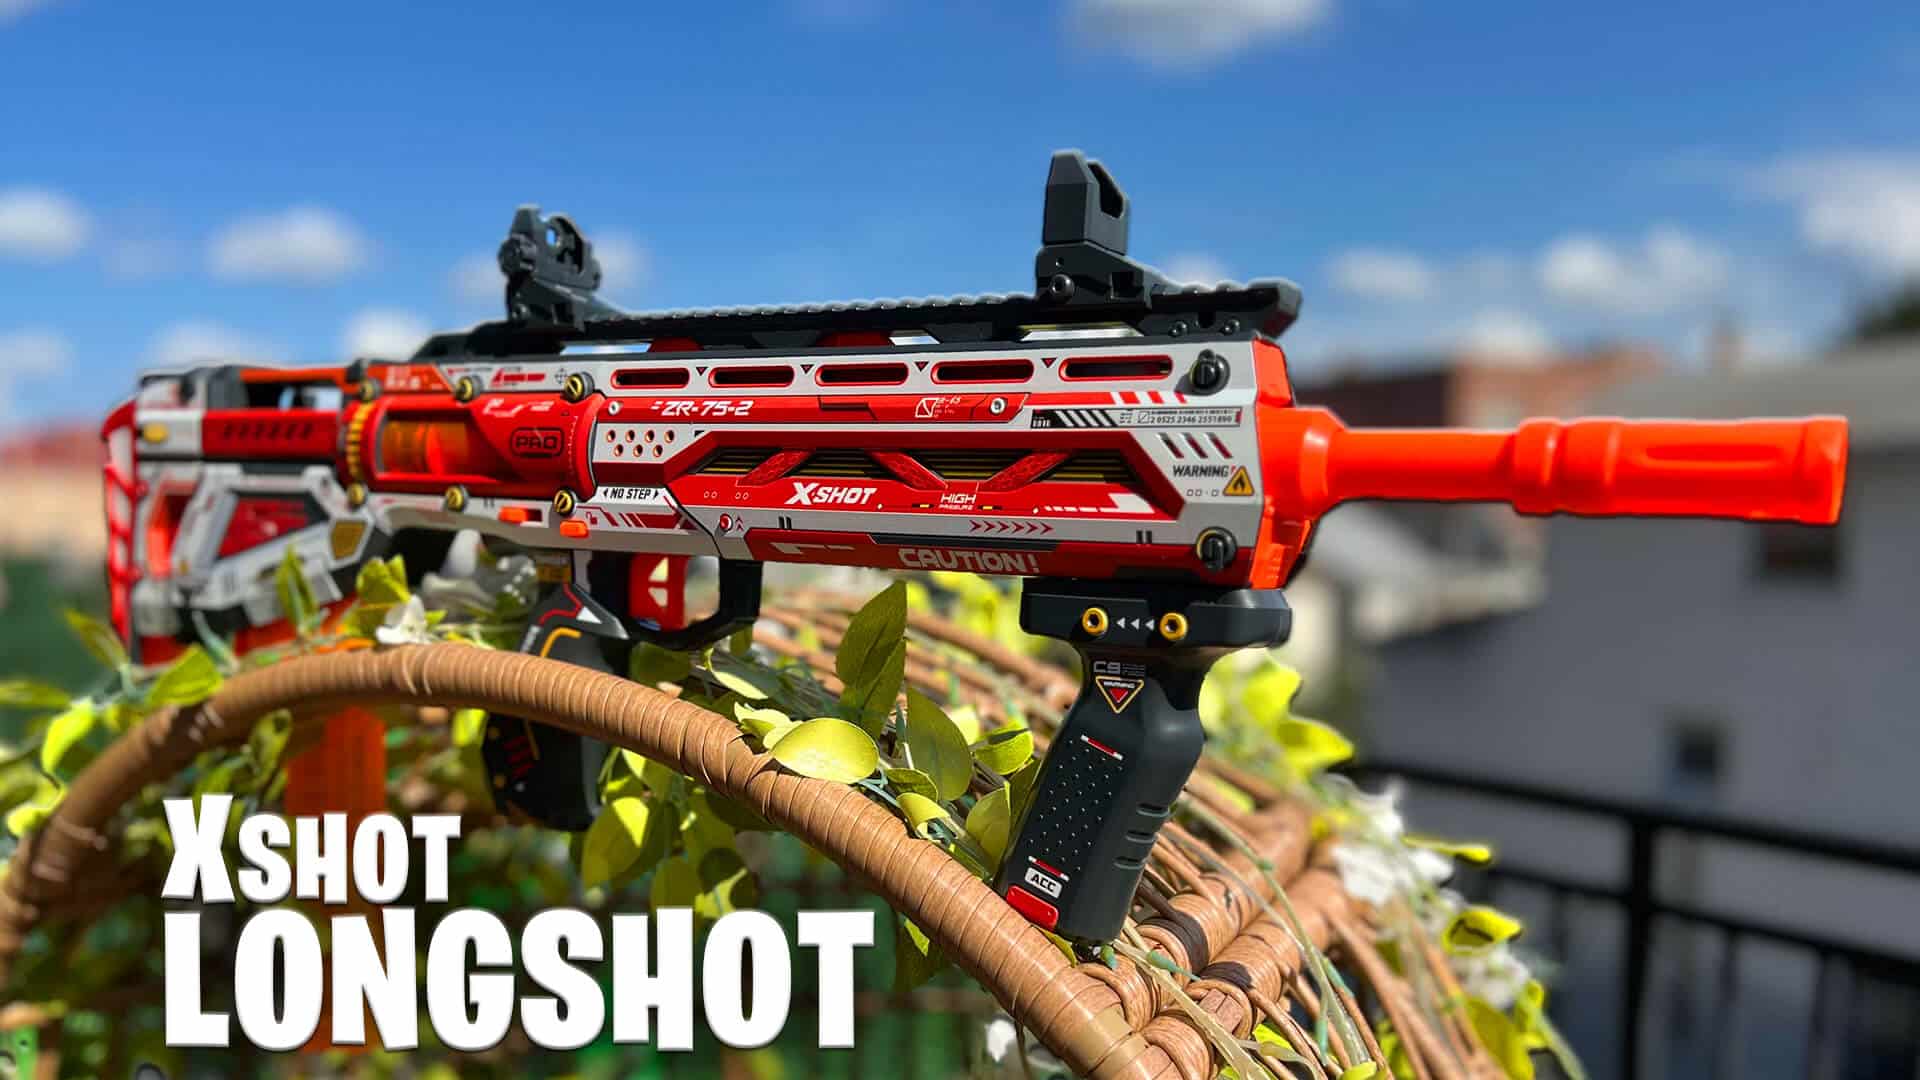 Zuru's X-Shot takes top spot in blasters and shooters through July